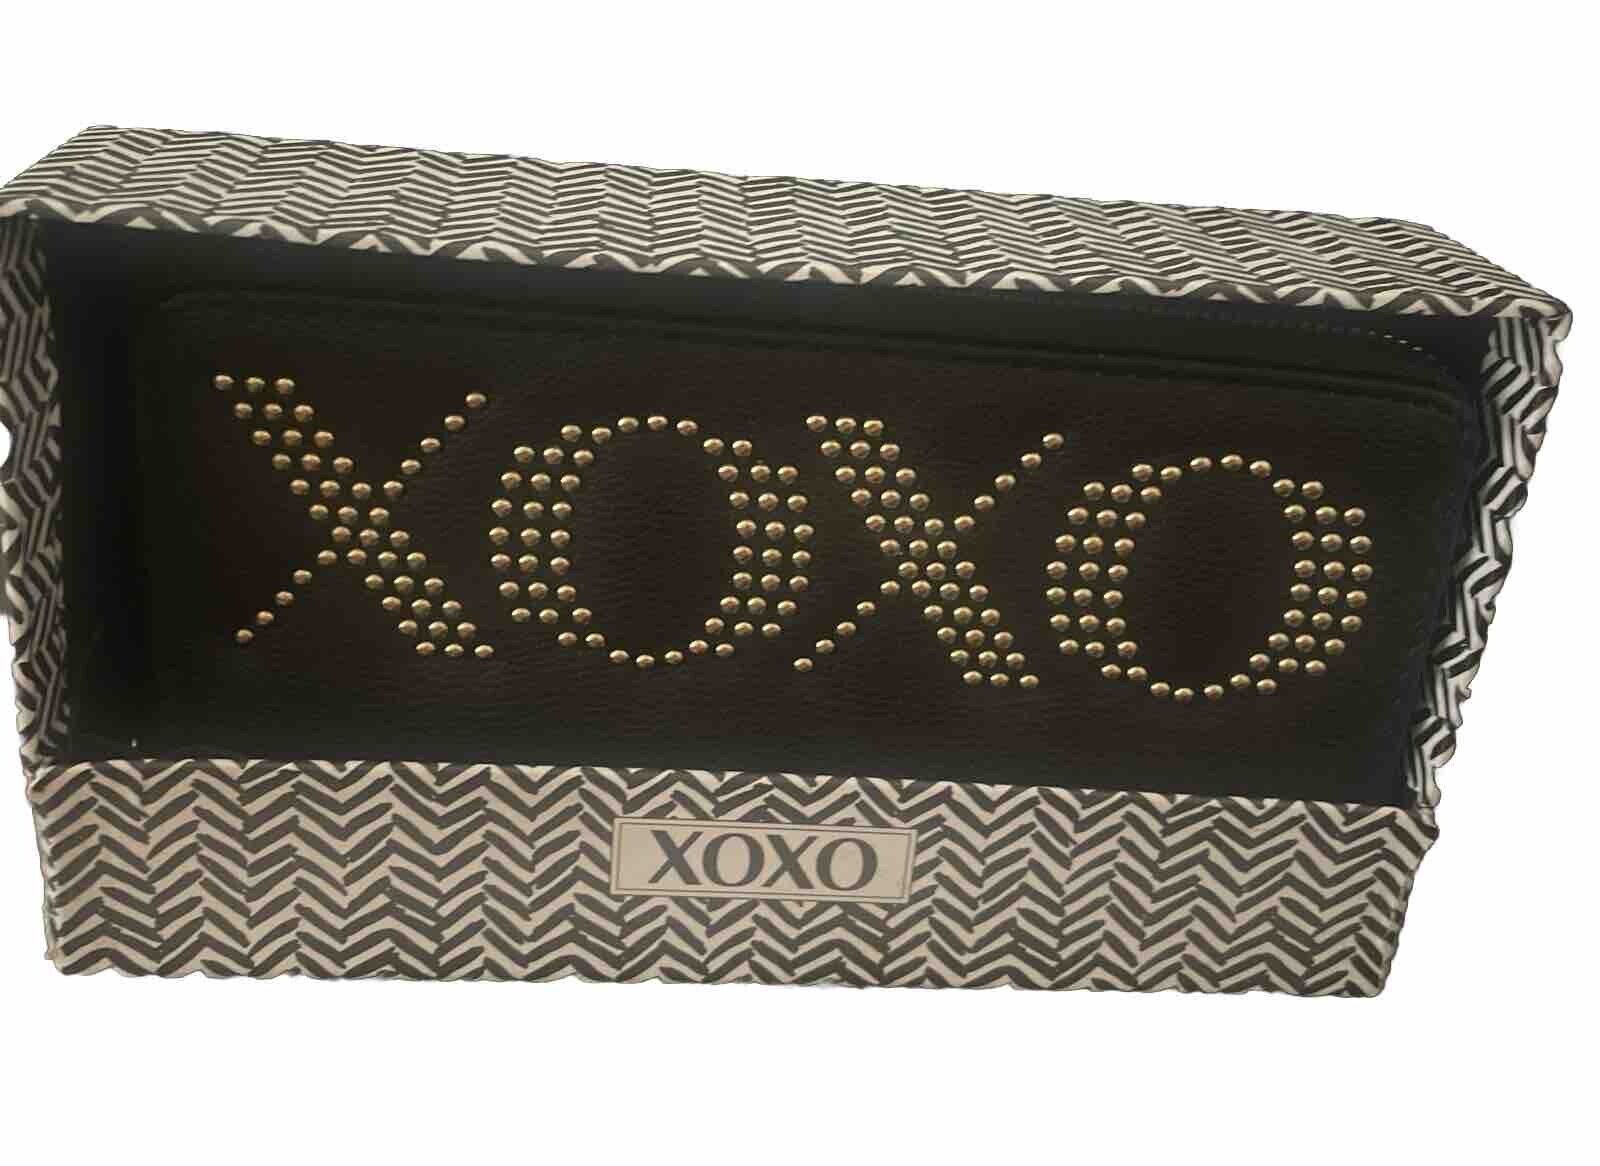 XOXO Women's Wristlet Wallet Comes In Box Which Makes It An Ideal Gift